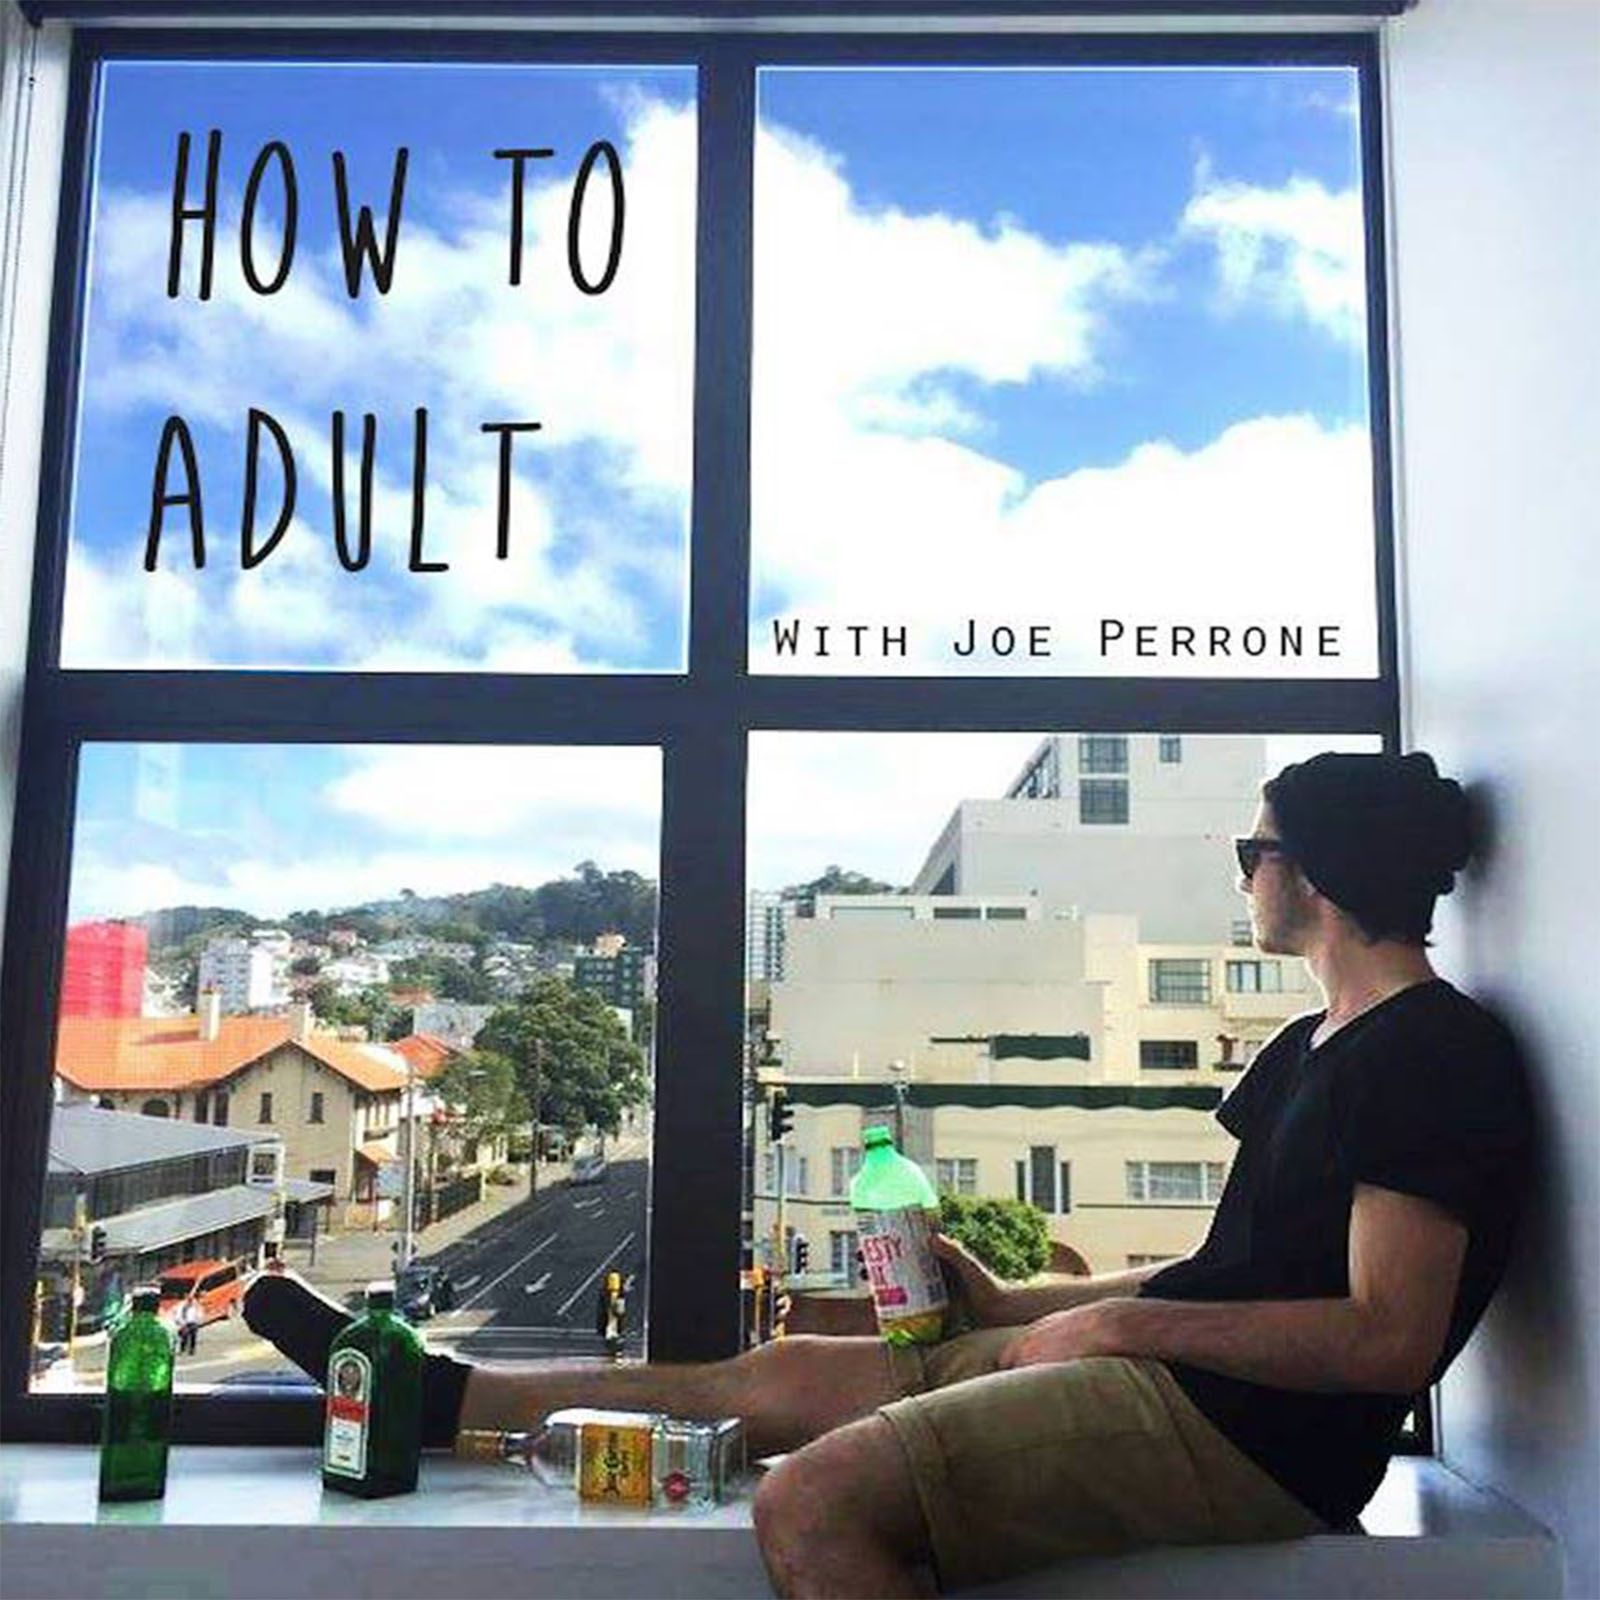 How to Adult.